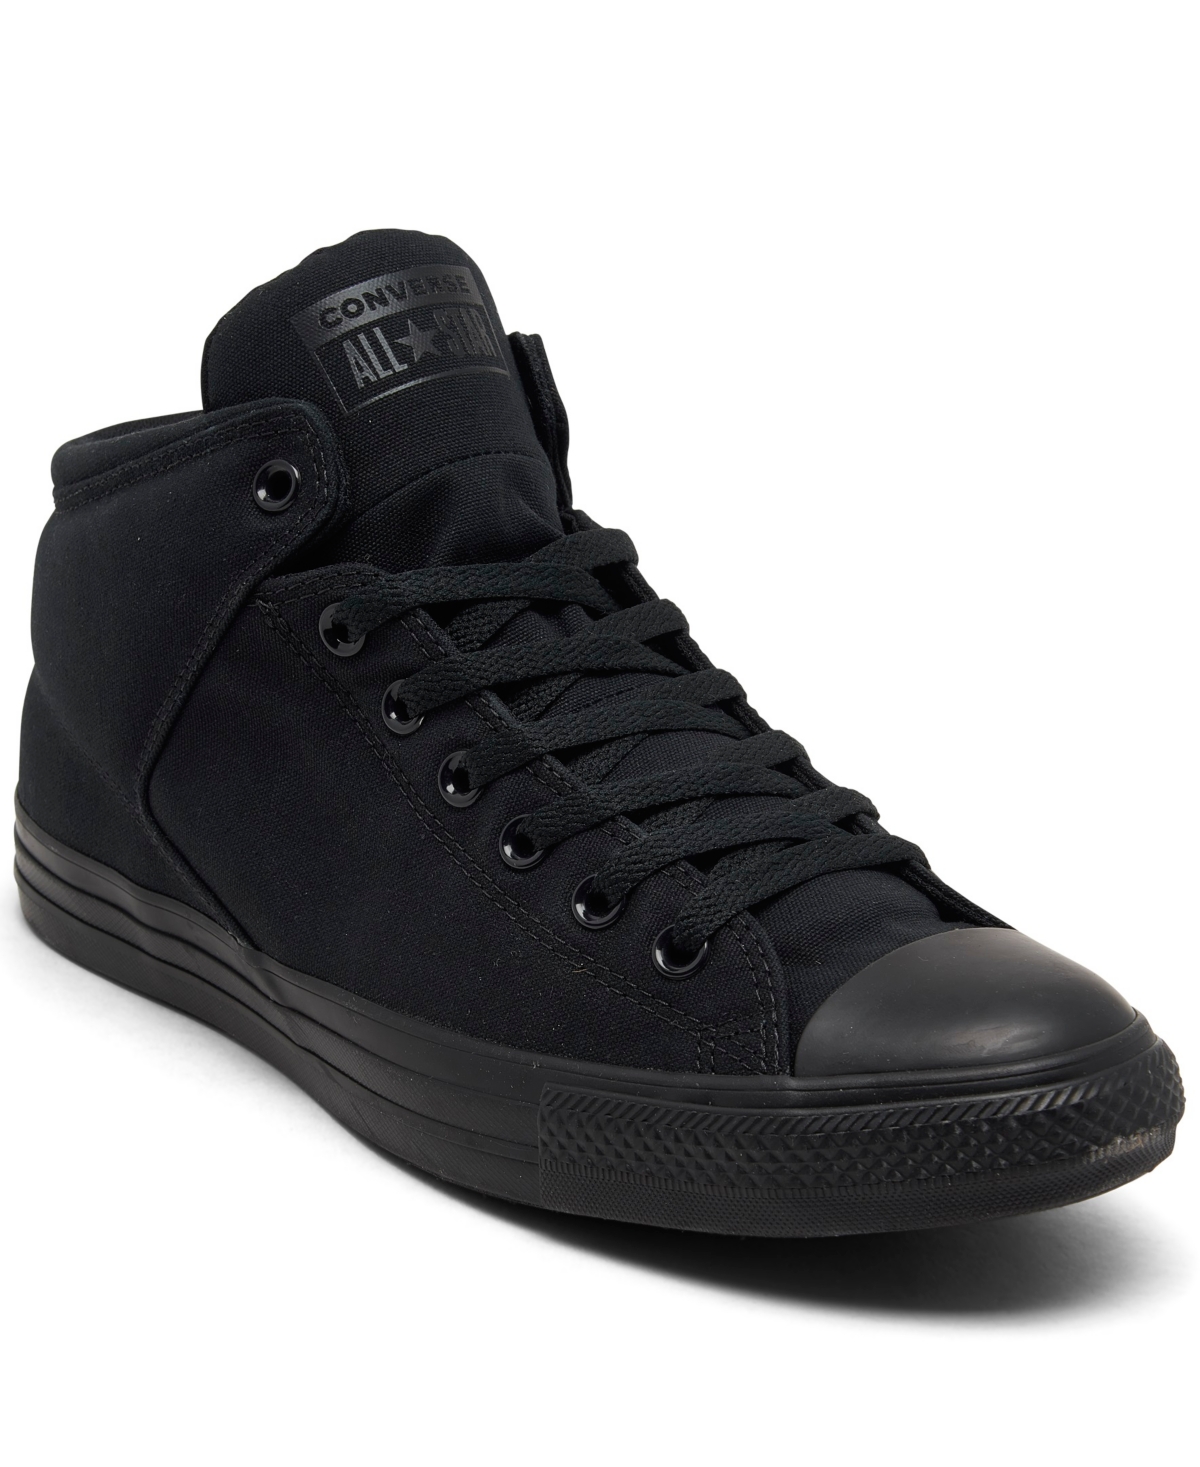 CONVERSE MEN'S CHUCK TAYLOR HIGH STREET OX CASUAL SNEAKERS FROM FINISH LINE